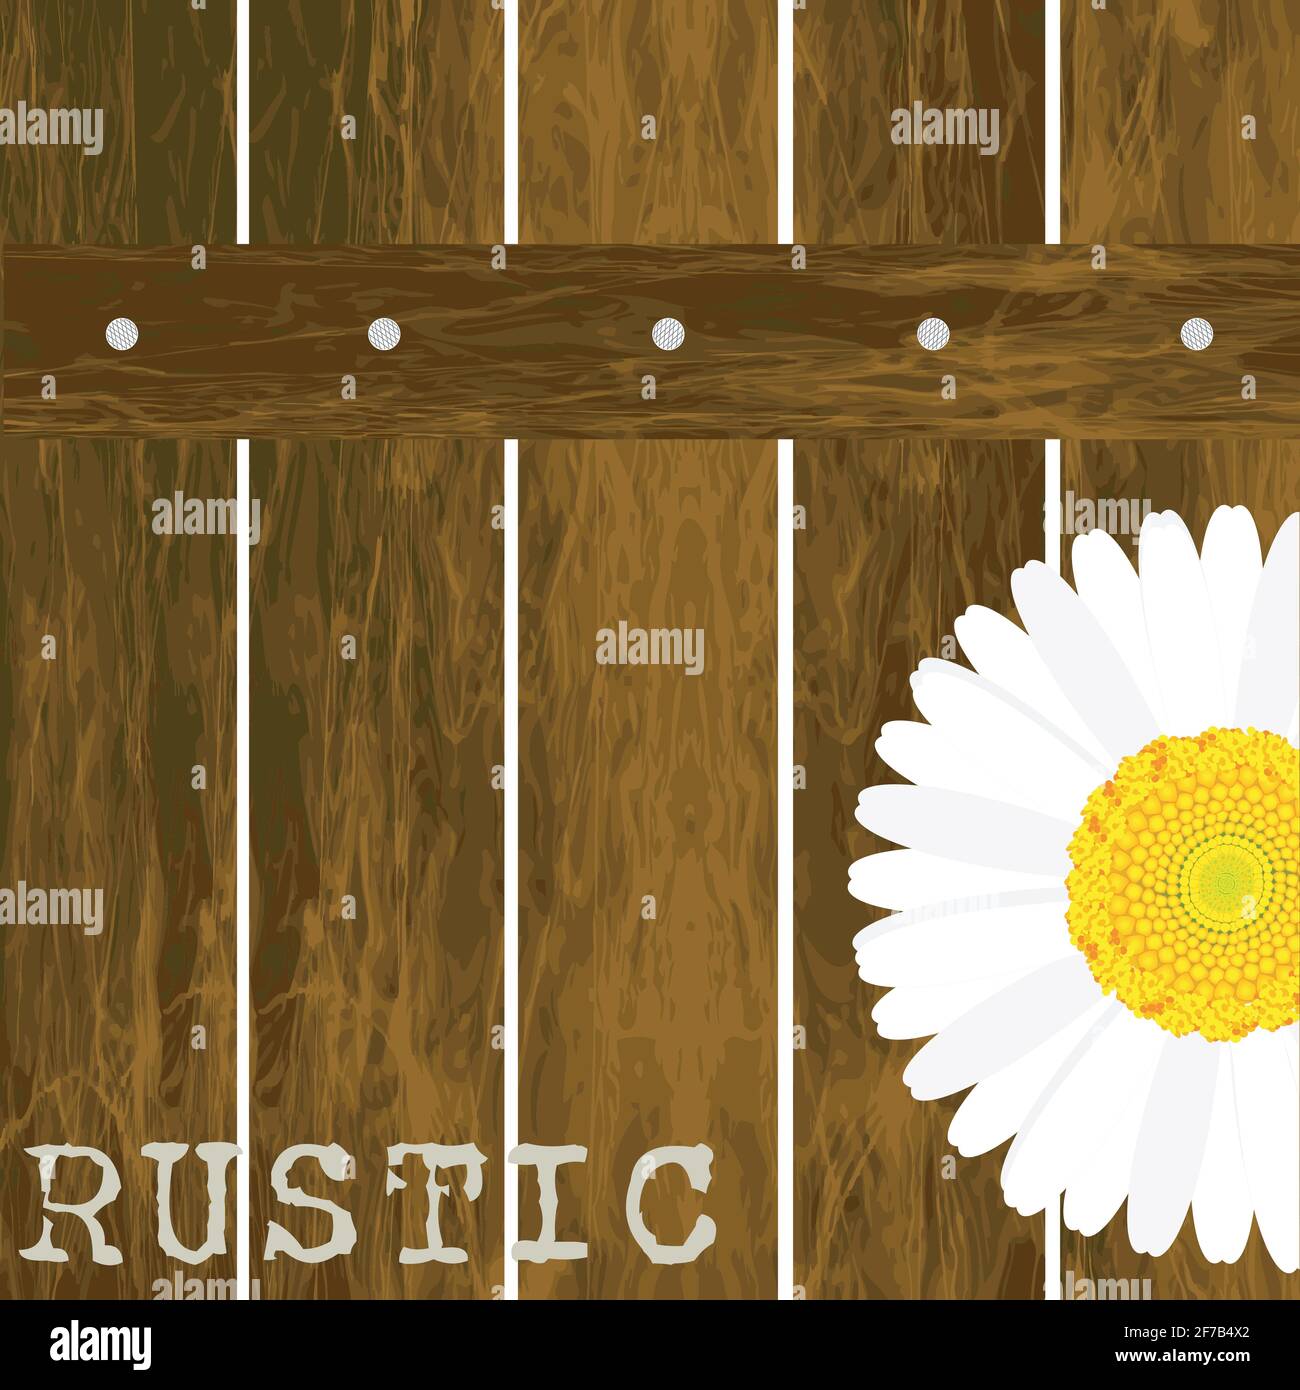 Rustic background with wooden fence and daisy Stock Vector